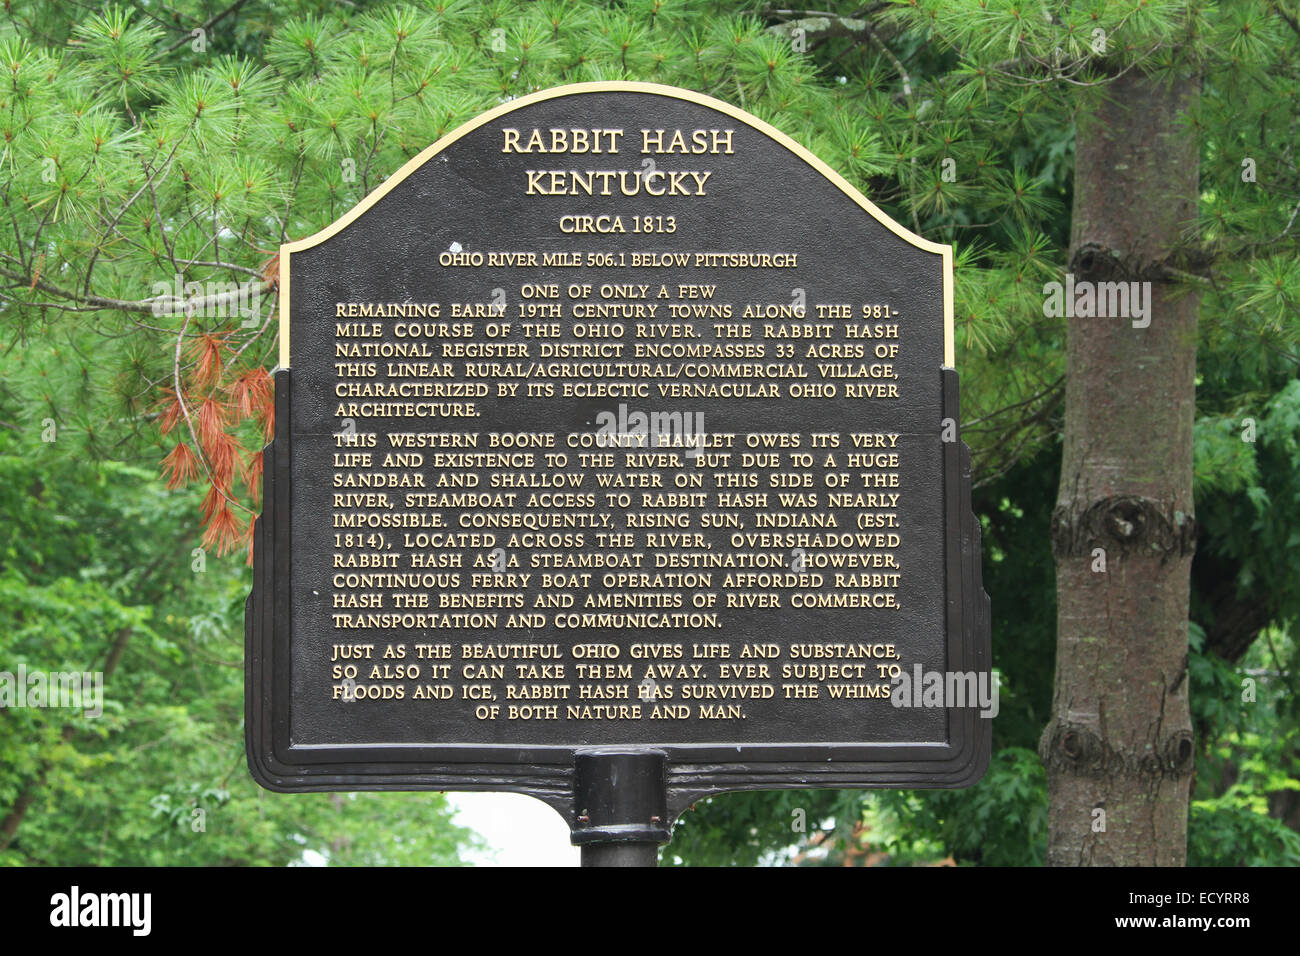 Historical Marker. Rabbit Hash, Kentucky, USA. Circa 1813. A historic small town on the Ohio River. Added to the National Regist Stock Photo